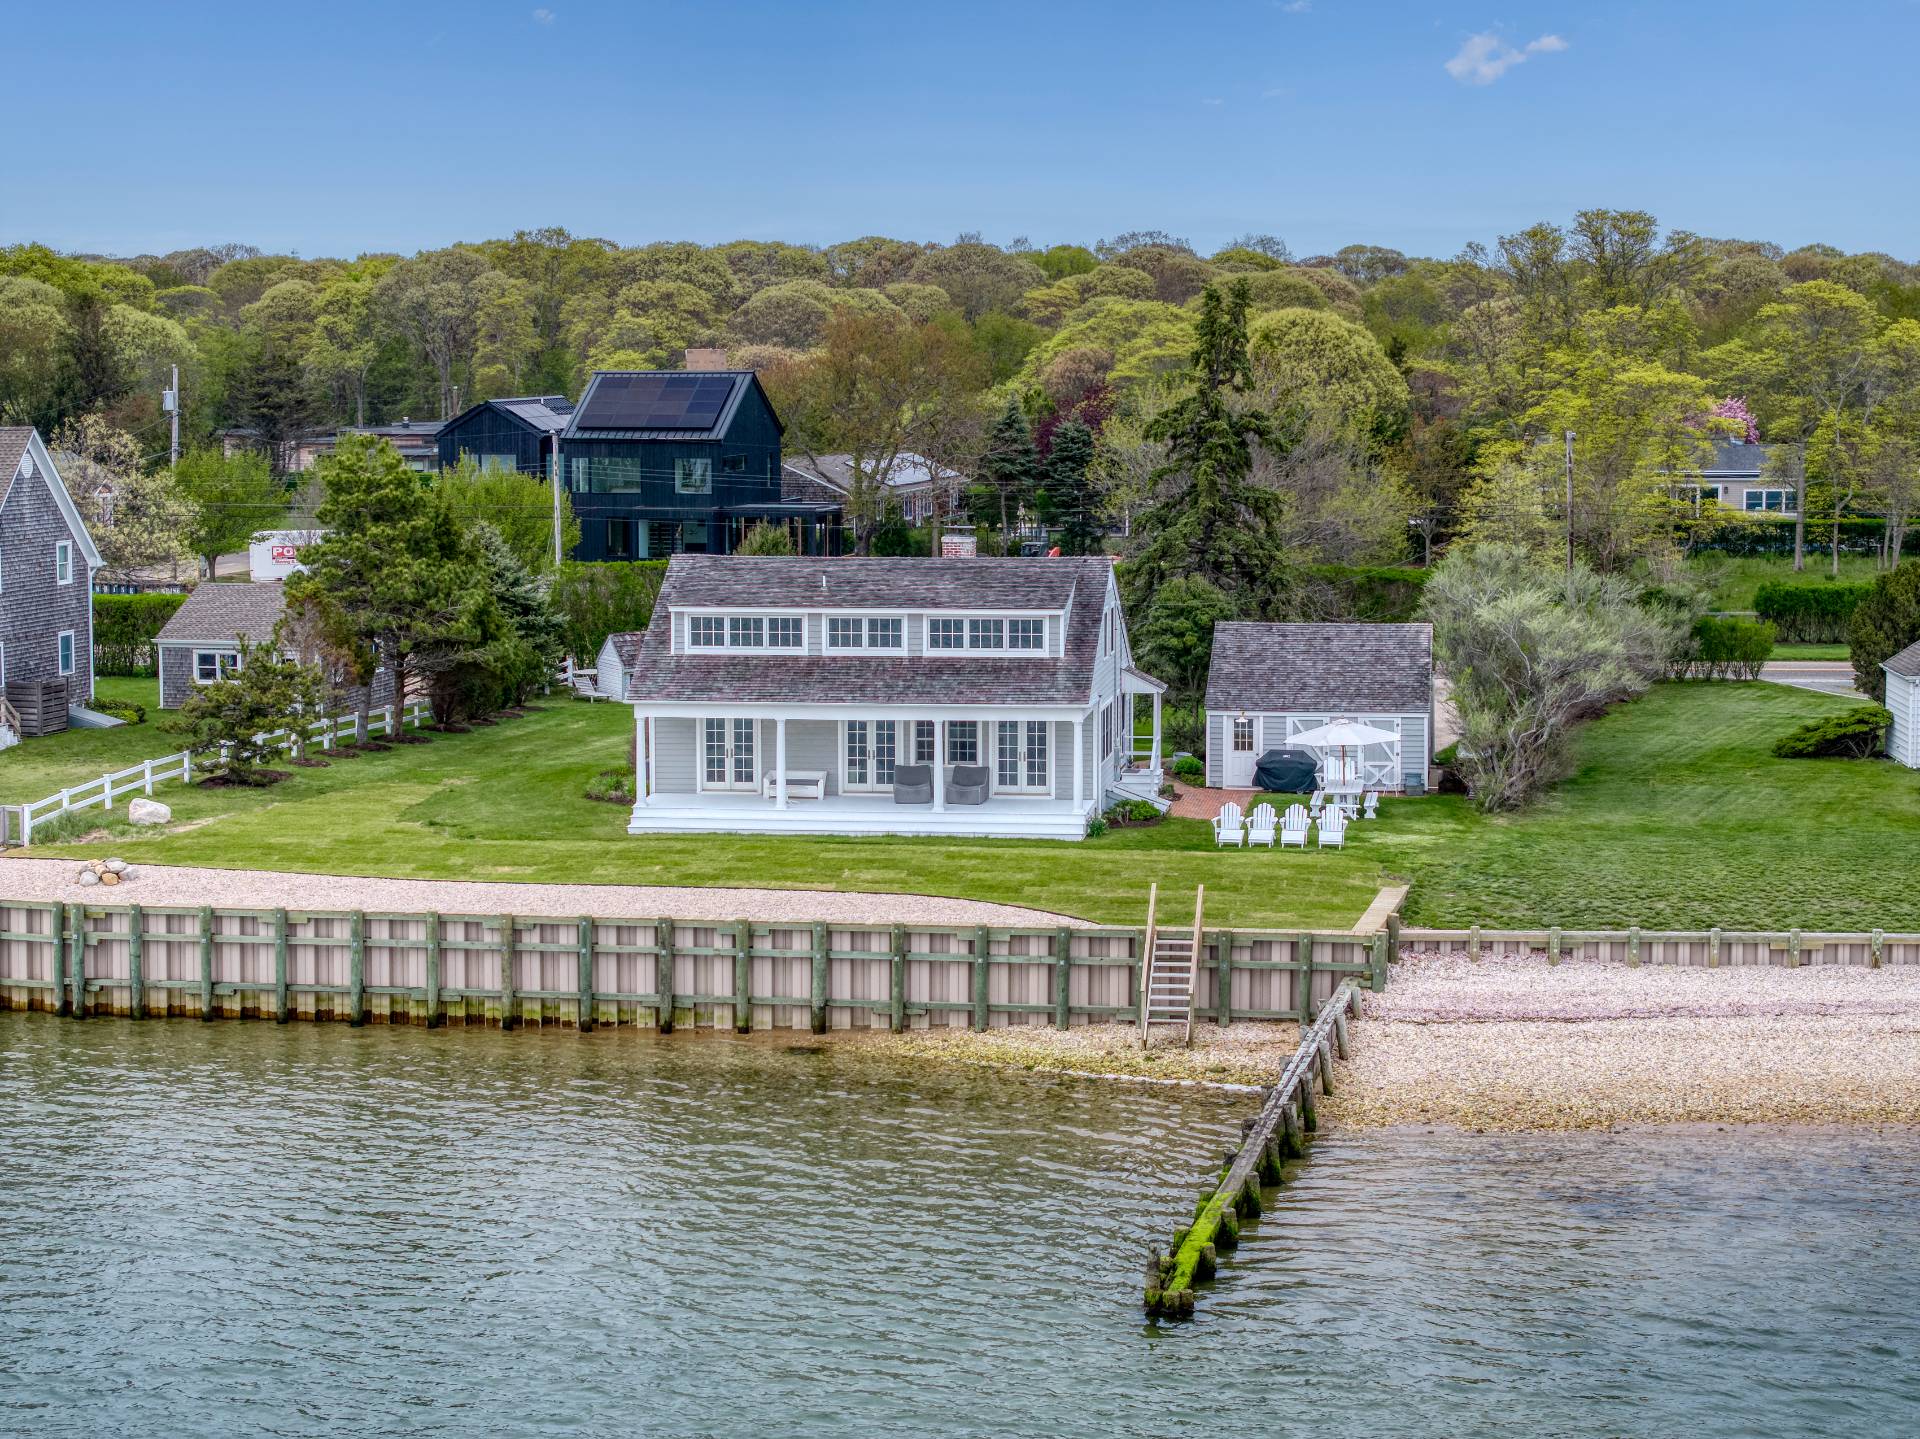 Rental Property at Shelter Island Heights, Shelter Island Heights, Hamptons, NY - Bedrooms: 4 
Bathrooms: 2  - $33,000 MO.